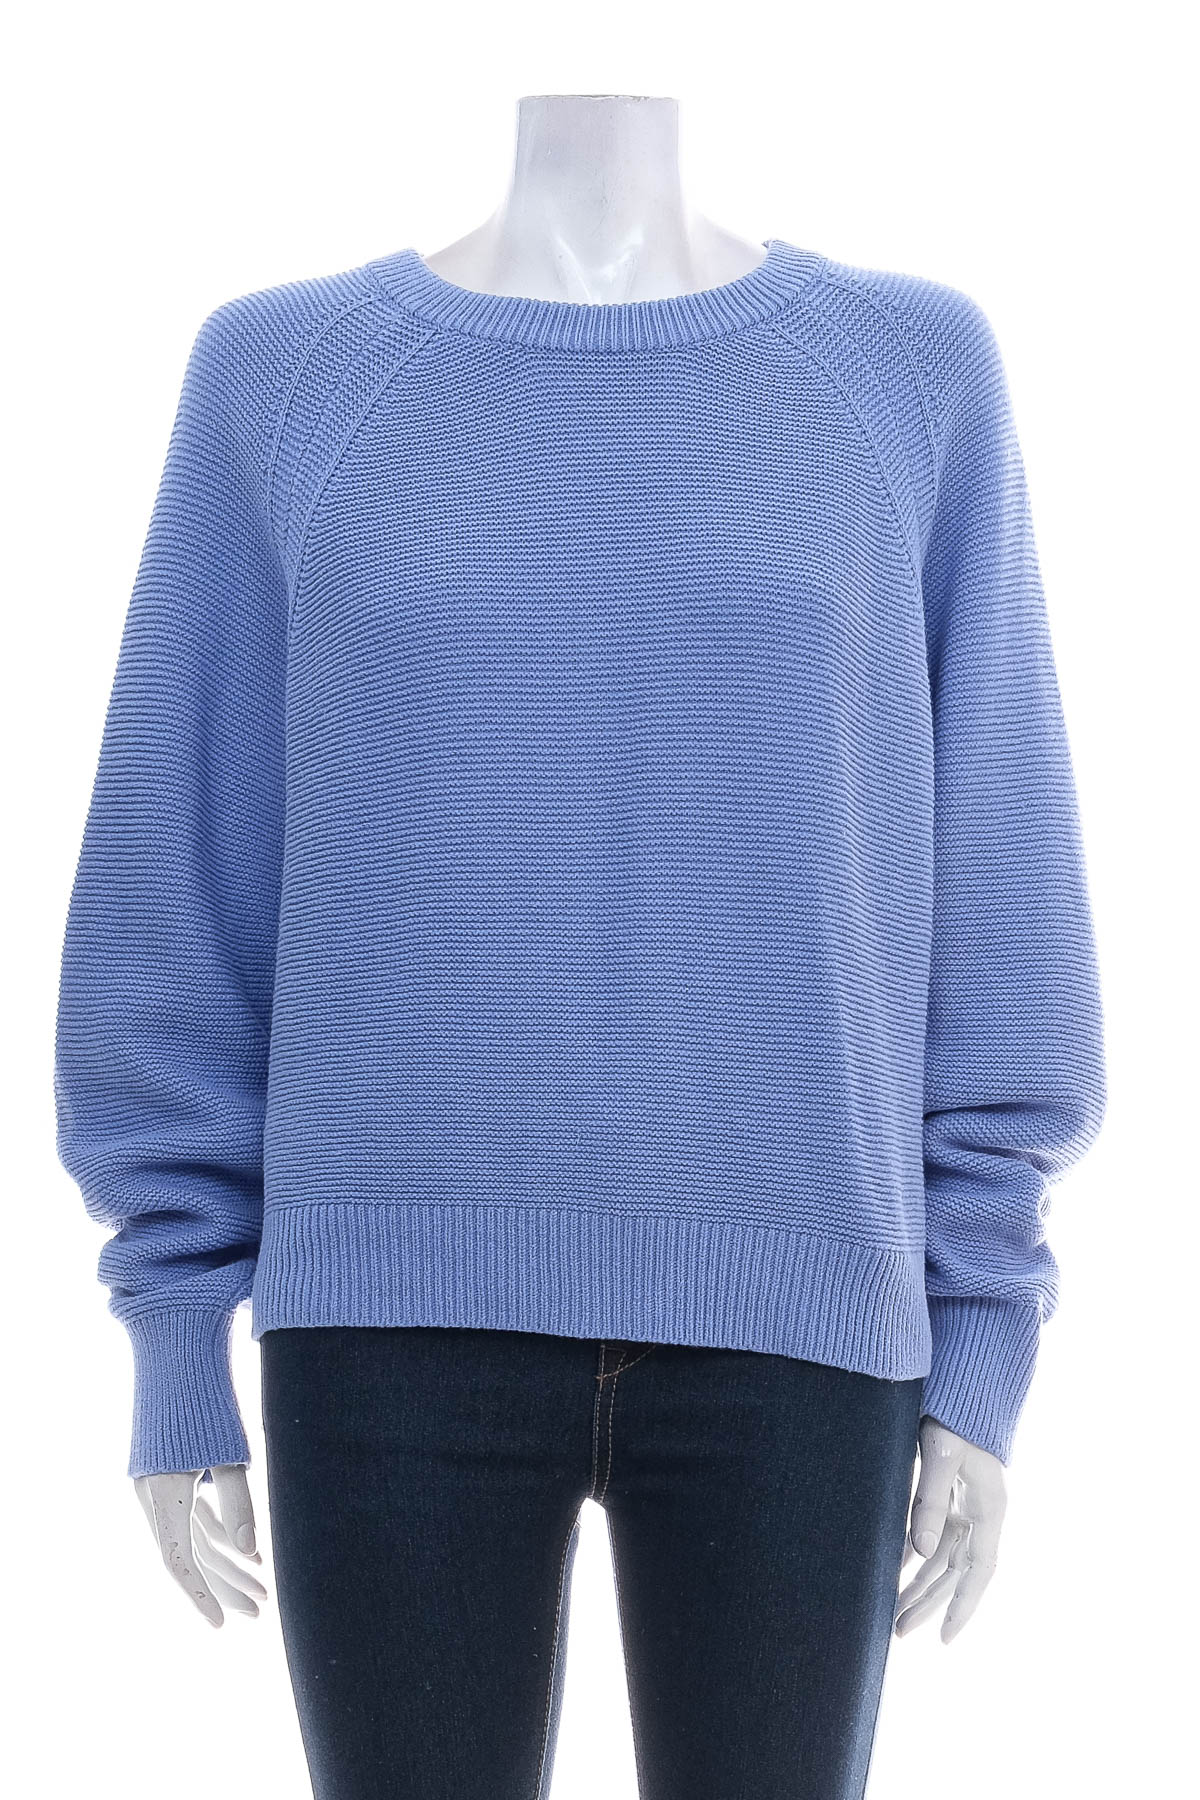 Women's sweater - French Connection - 0